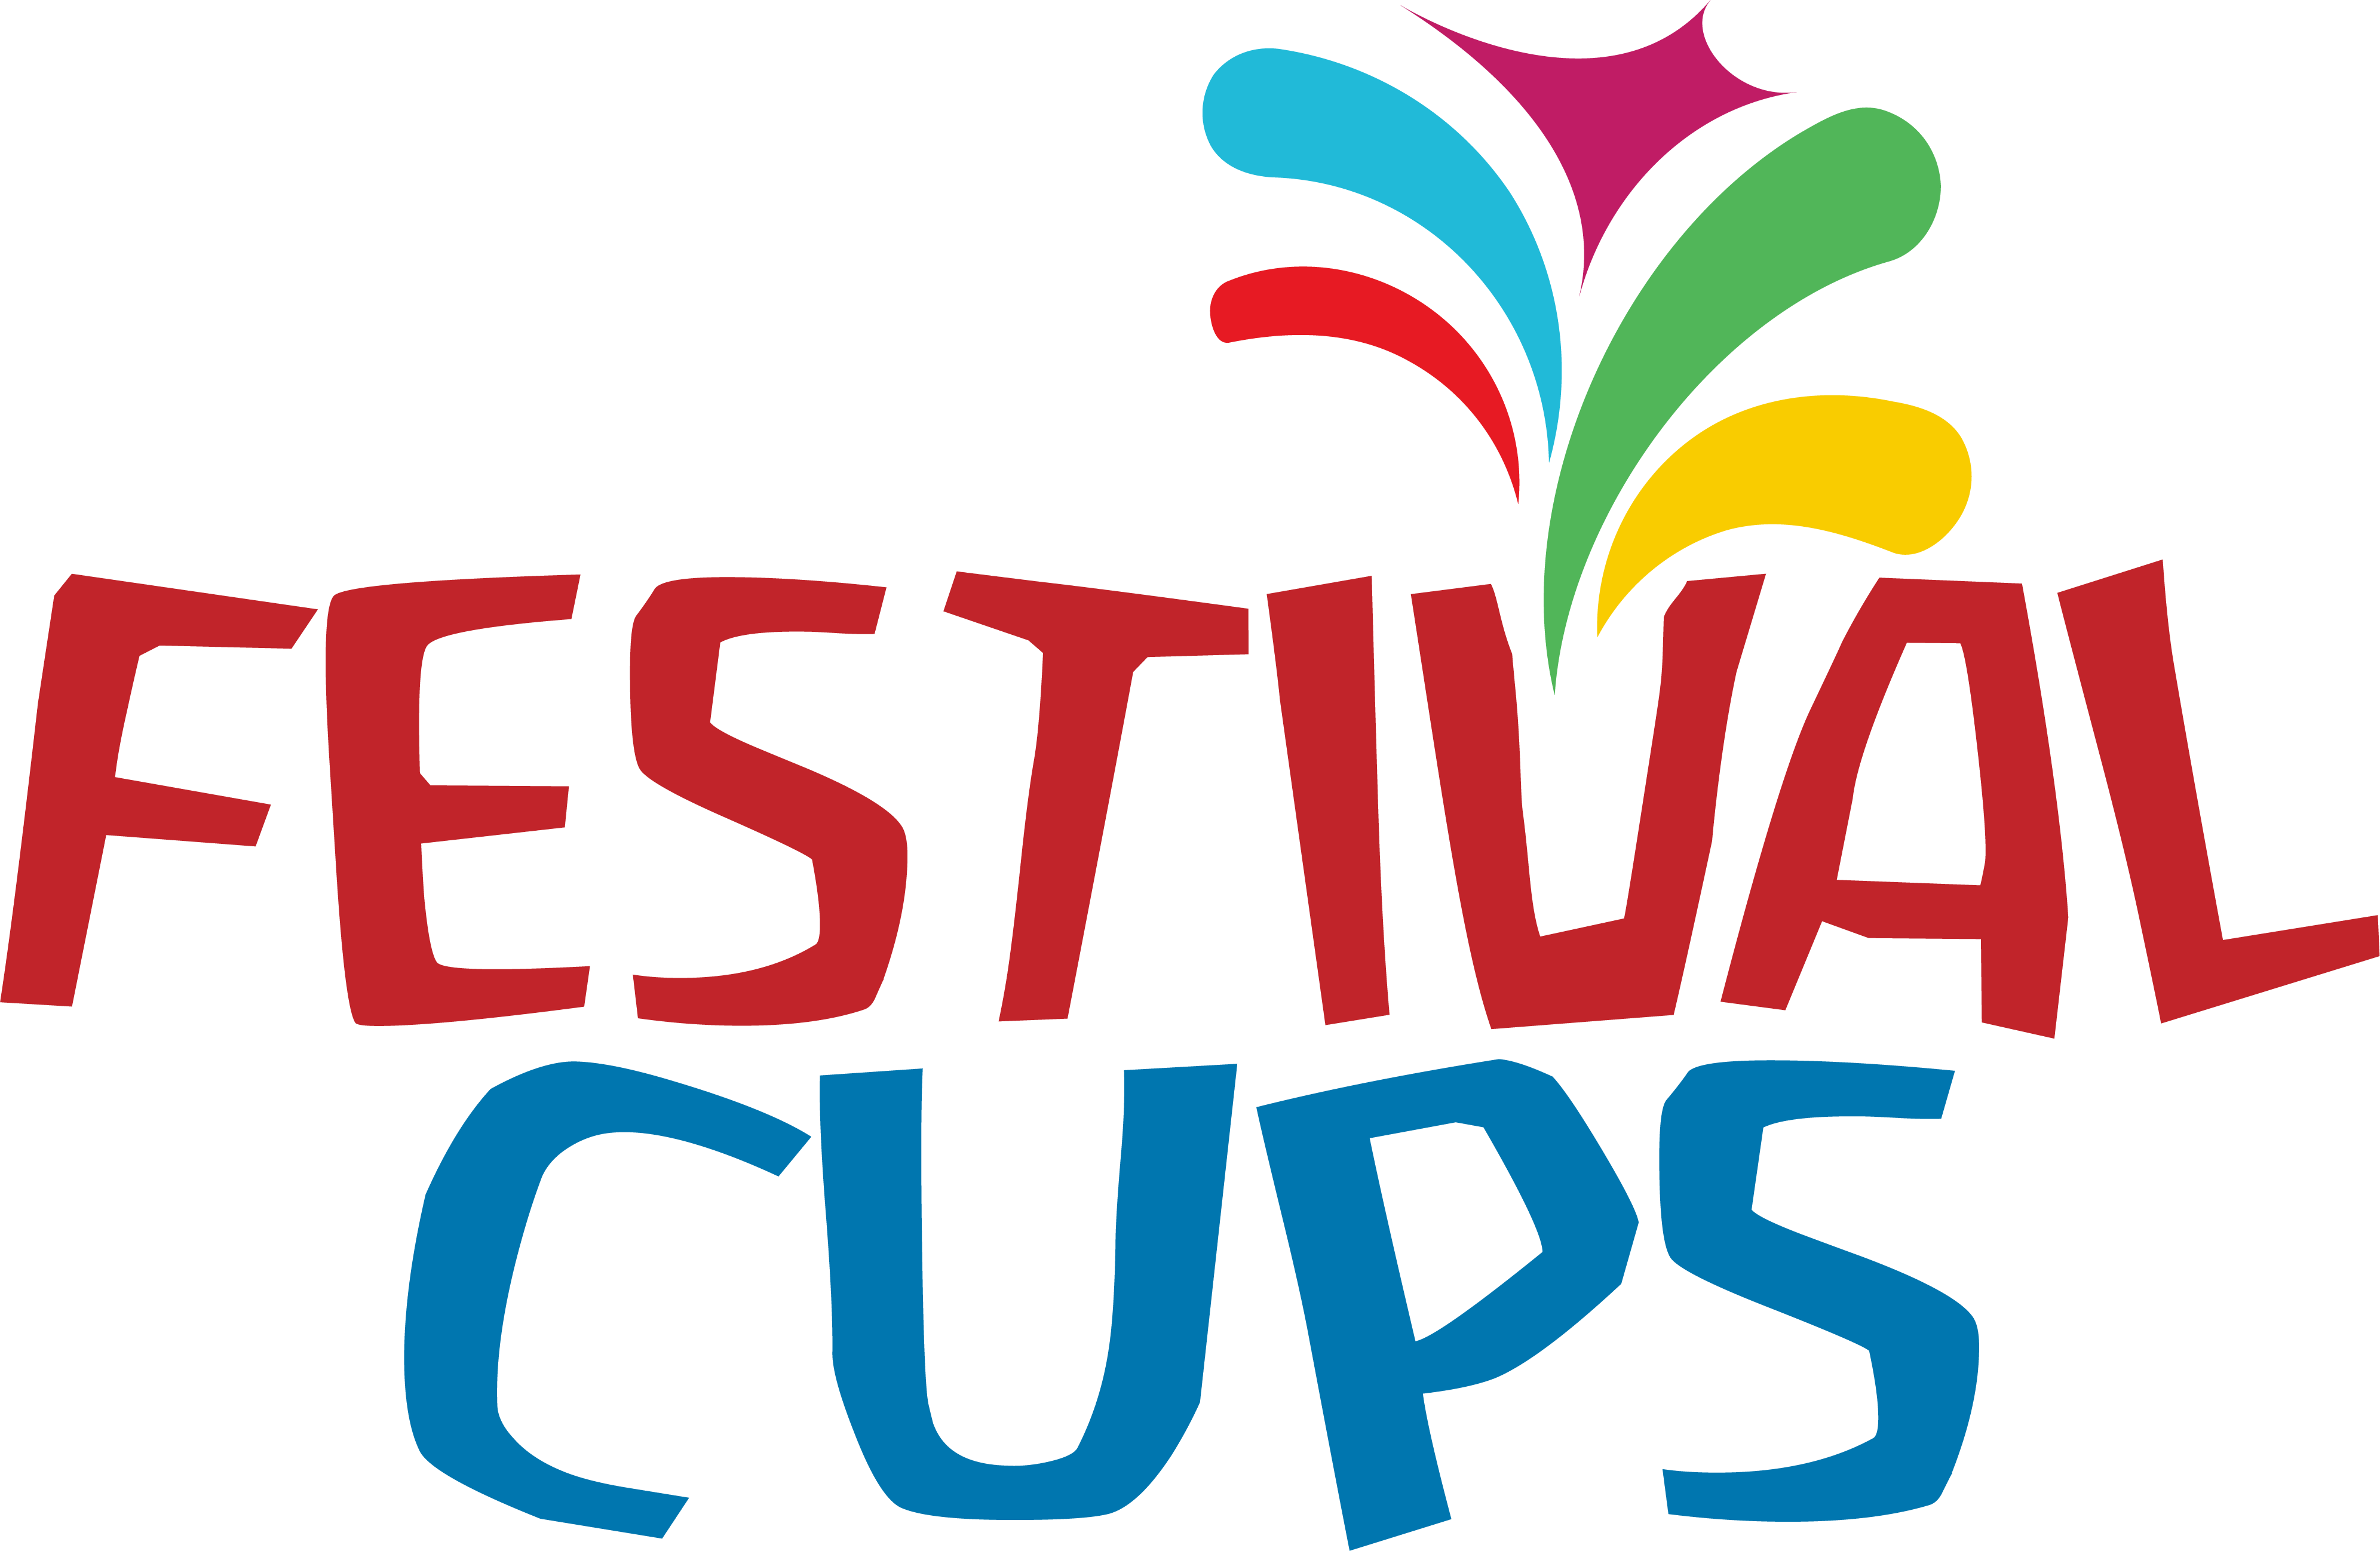 Festival Cups